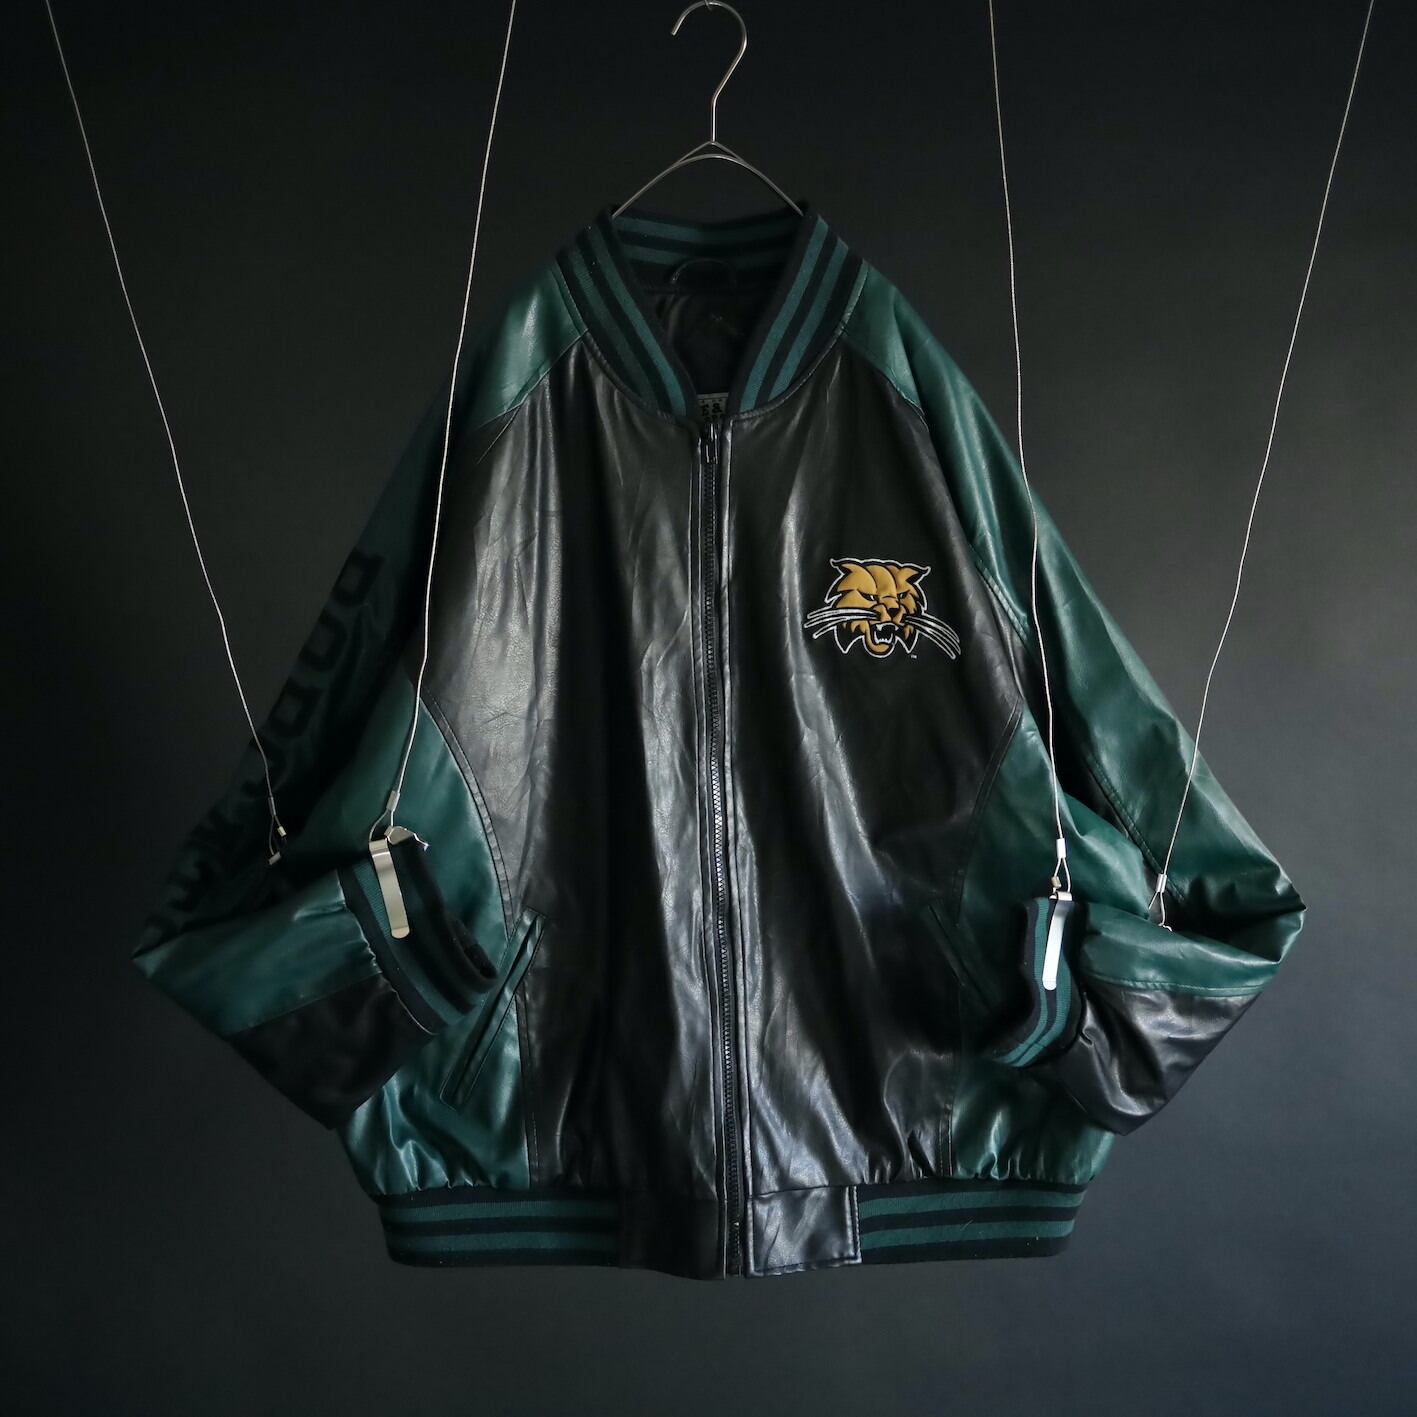 over silhouette black × green bi-color switching design fake leather jacket